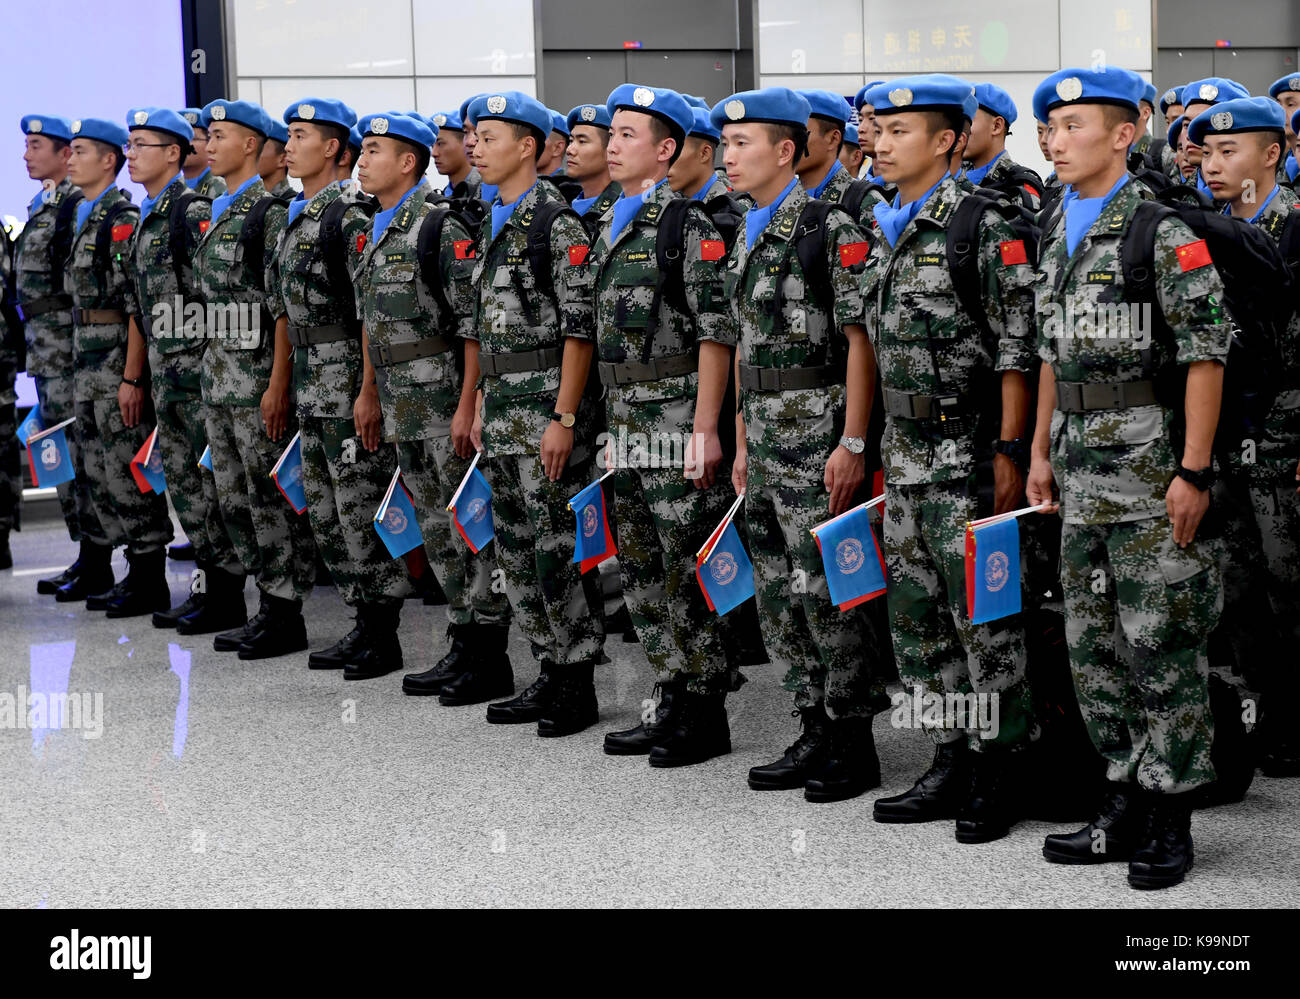 Zhengzhou, China's Henan Province. 21st Sep, 2017. Chinese peacekeepers attend a ceremony before leaving for South Sudan from Zhengzhou, capital of central China's Henan Province, Sept. 21, 2017. The 105-member squad of Chinese peacekeepers left for Wau in South Sudan on a one-year peacekeeping mission. Credit: Zhu Xiang/Xinhua/Alamy Live News Stock Photo